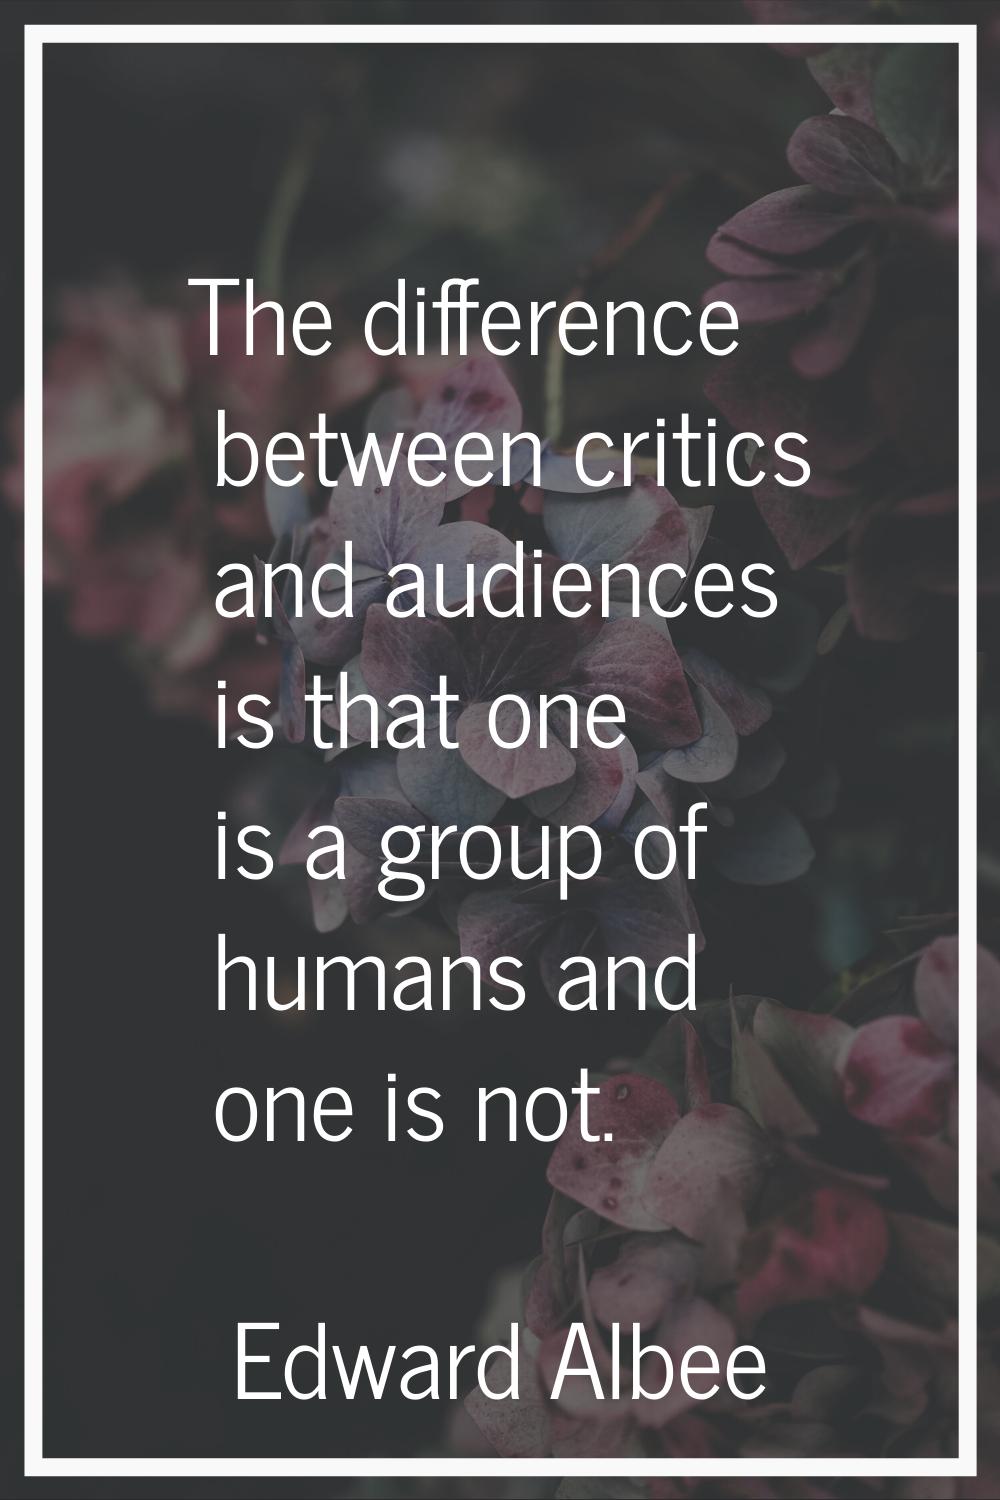 The difference between critics and audiences is that one is a group of humans and one is not.